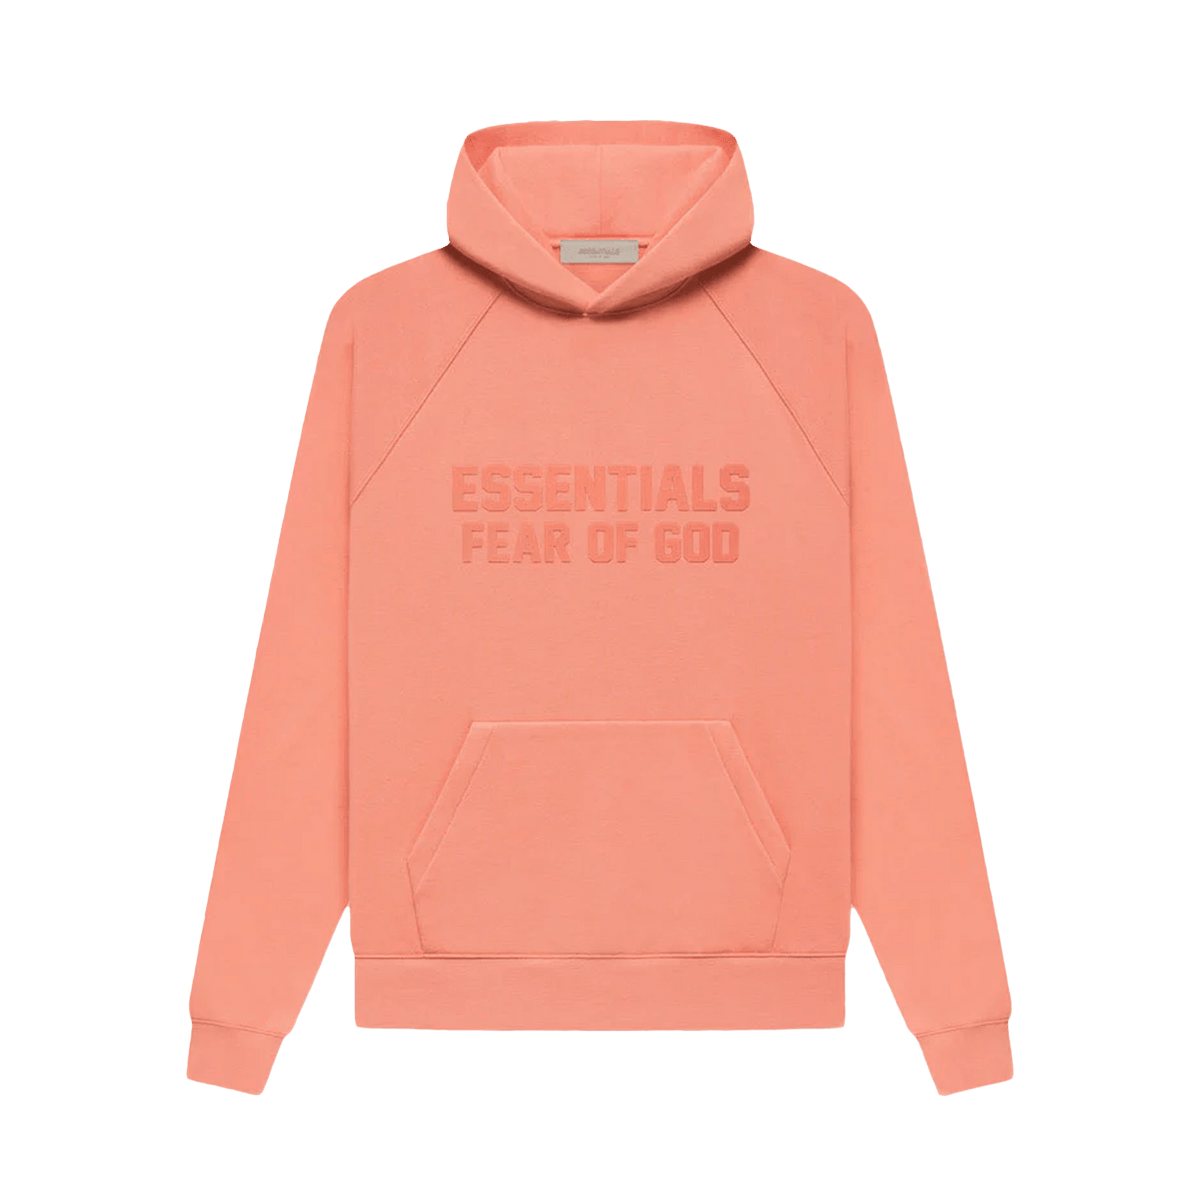 Fear of God Essentials Hoodie 'Coral' - CerbeShops